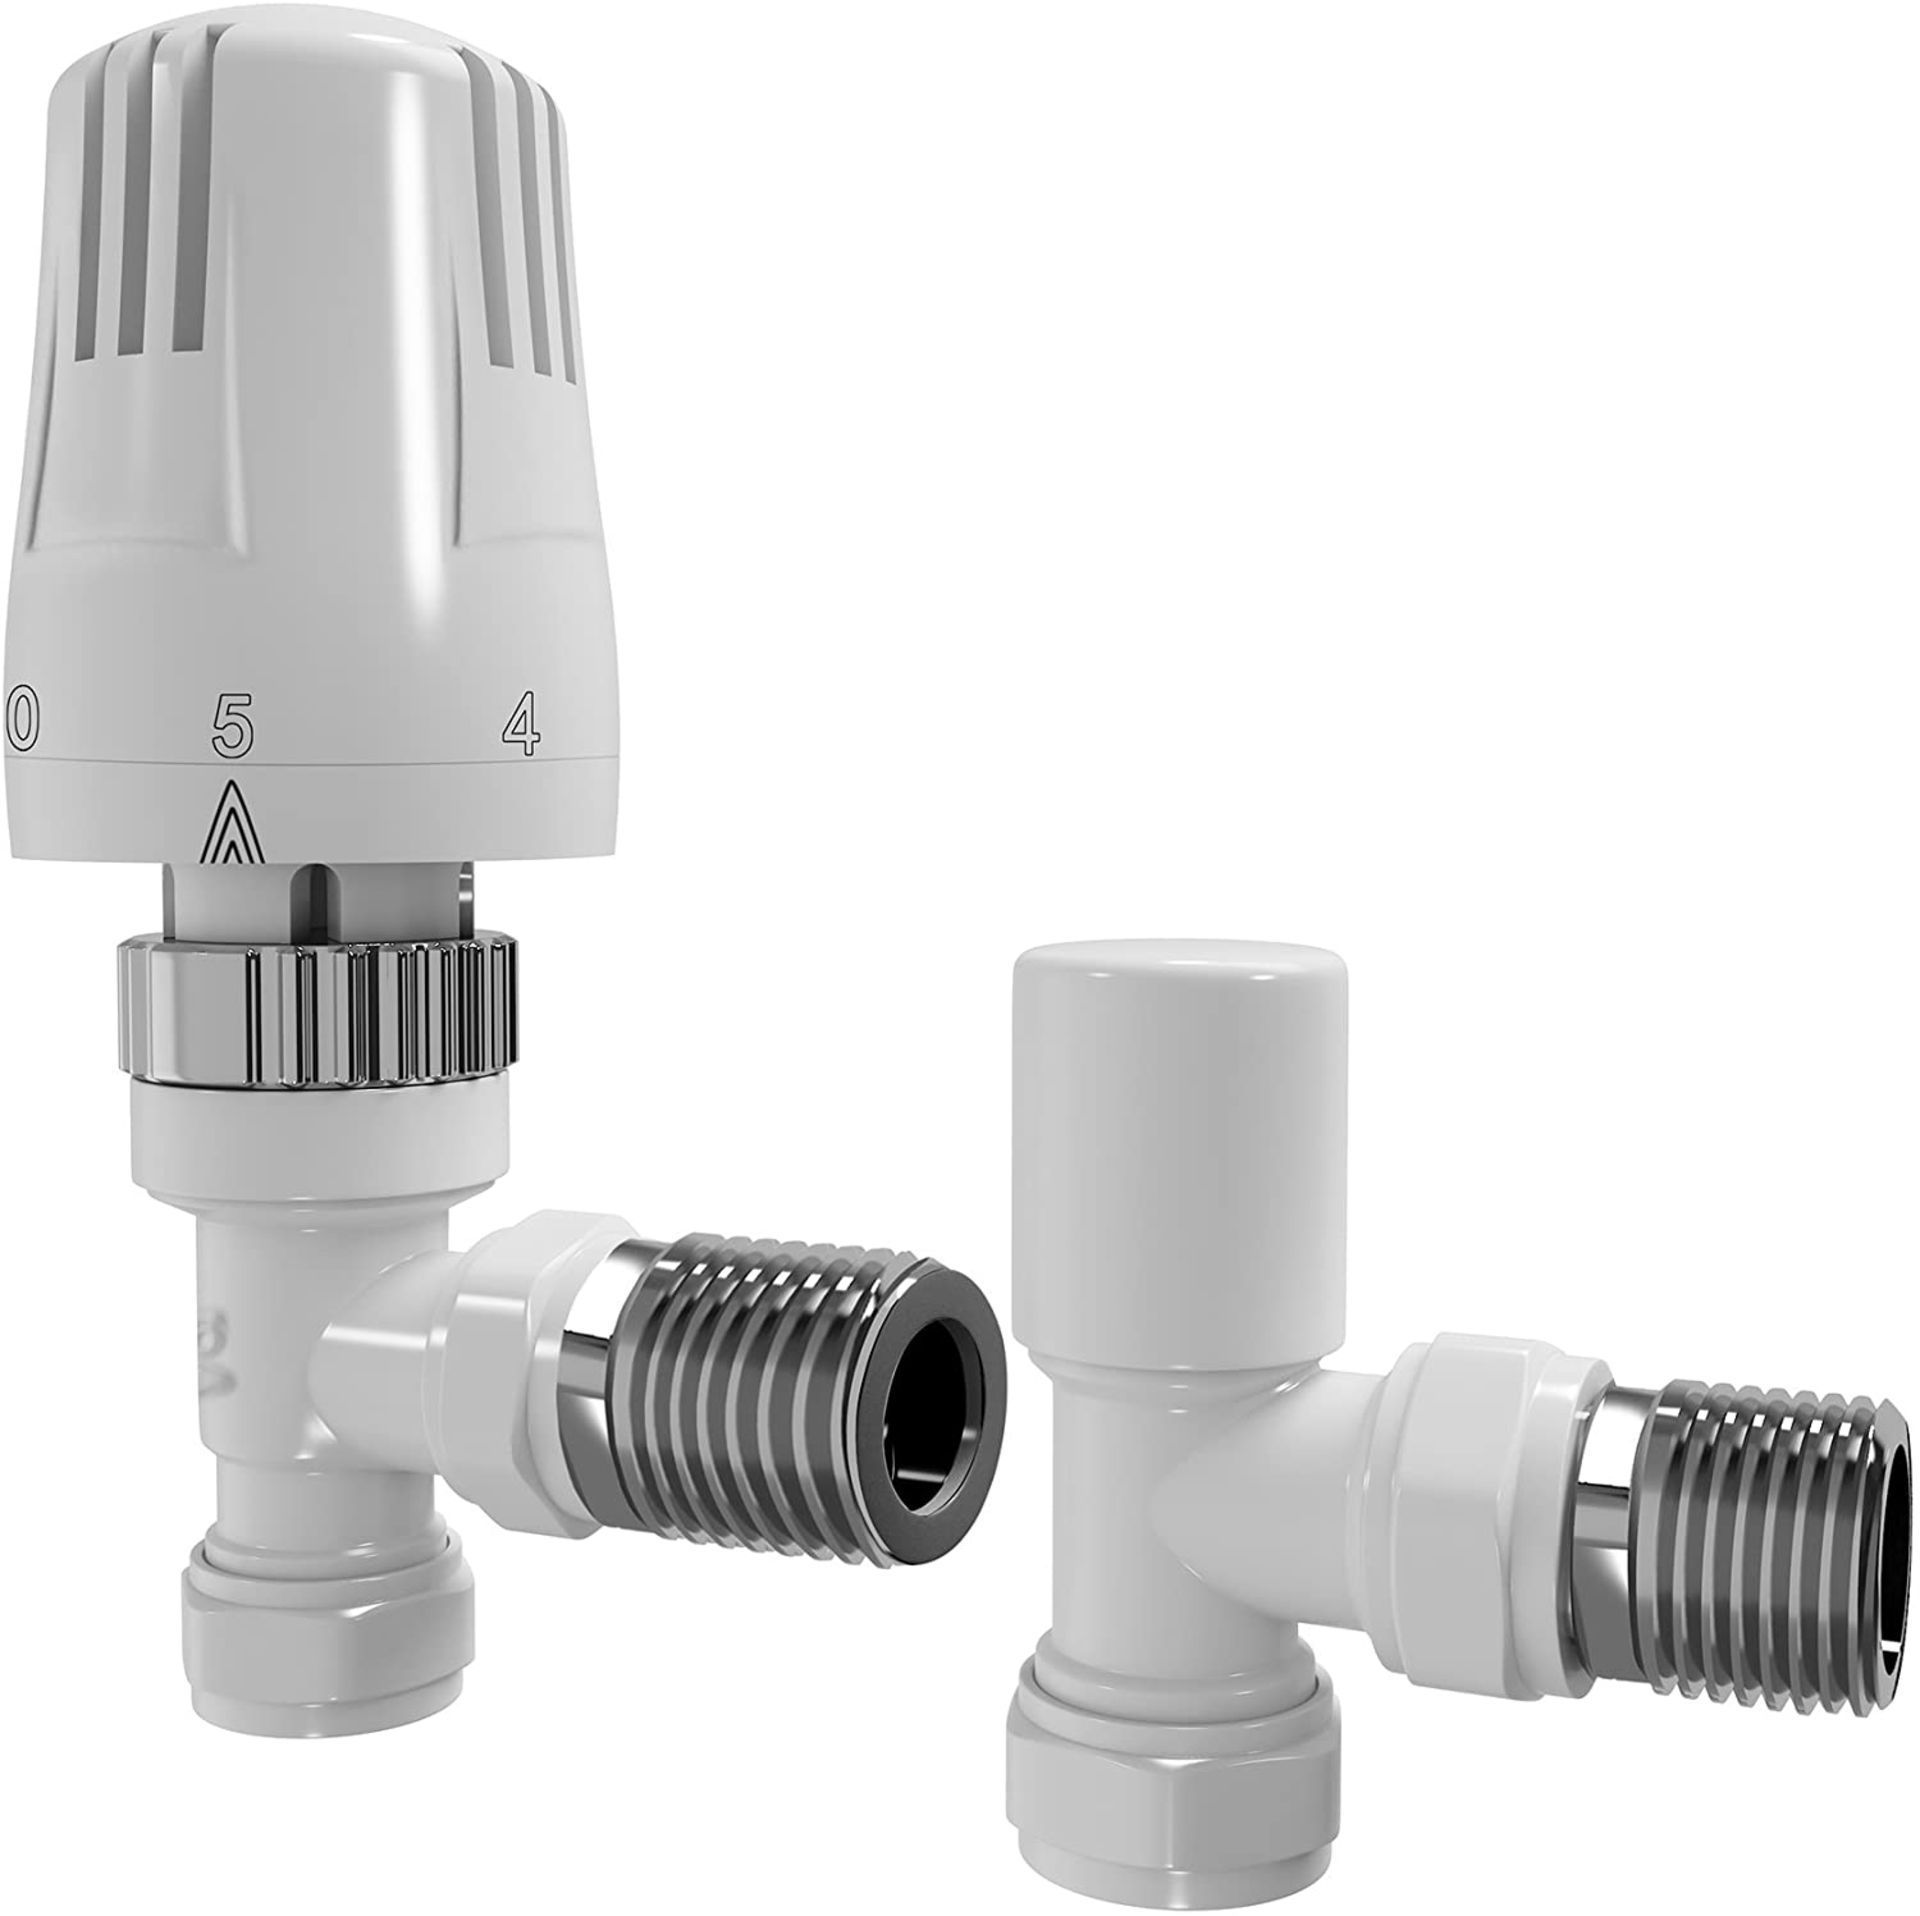 White Thermostatic Angled Radiator Valves TRV T15mm Central Heating Taps. RA32A. Solid br...